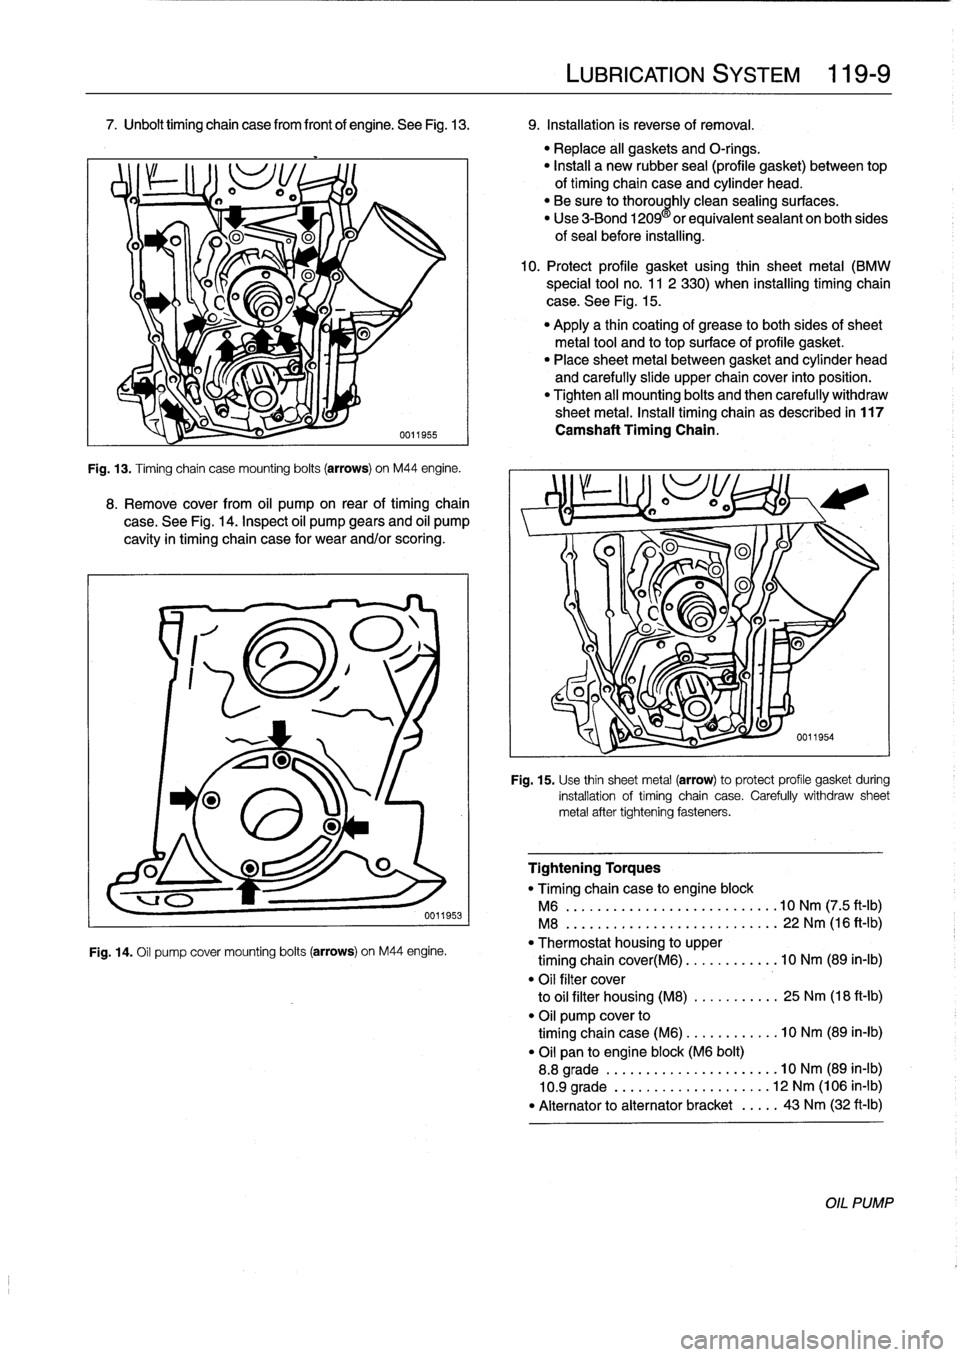 BMW 318i 1997 E36 Service Manual 7
.
Unbolt
timing
chain
casefrom
frontof
engine
.
See
Fig
.
13
.

	

9
.
Installation
is
reverse
of
removal
.

Fig
.
13
.
Timing
chain
case
mounting
bolts
(arrows)
on
M44
engine
.

8
.
Remove
cover
fr